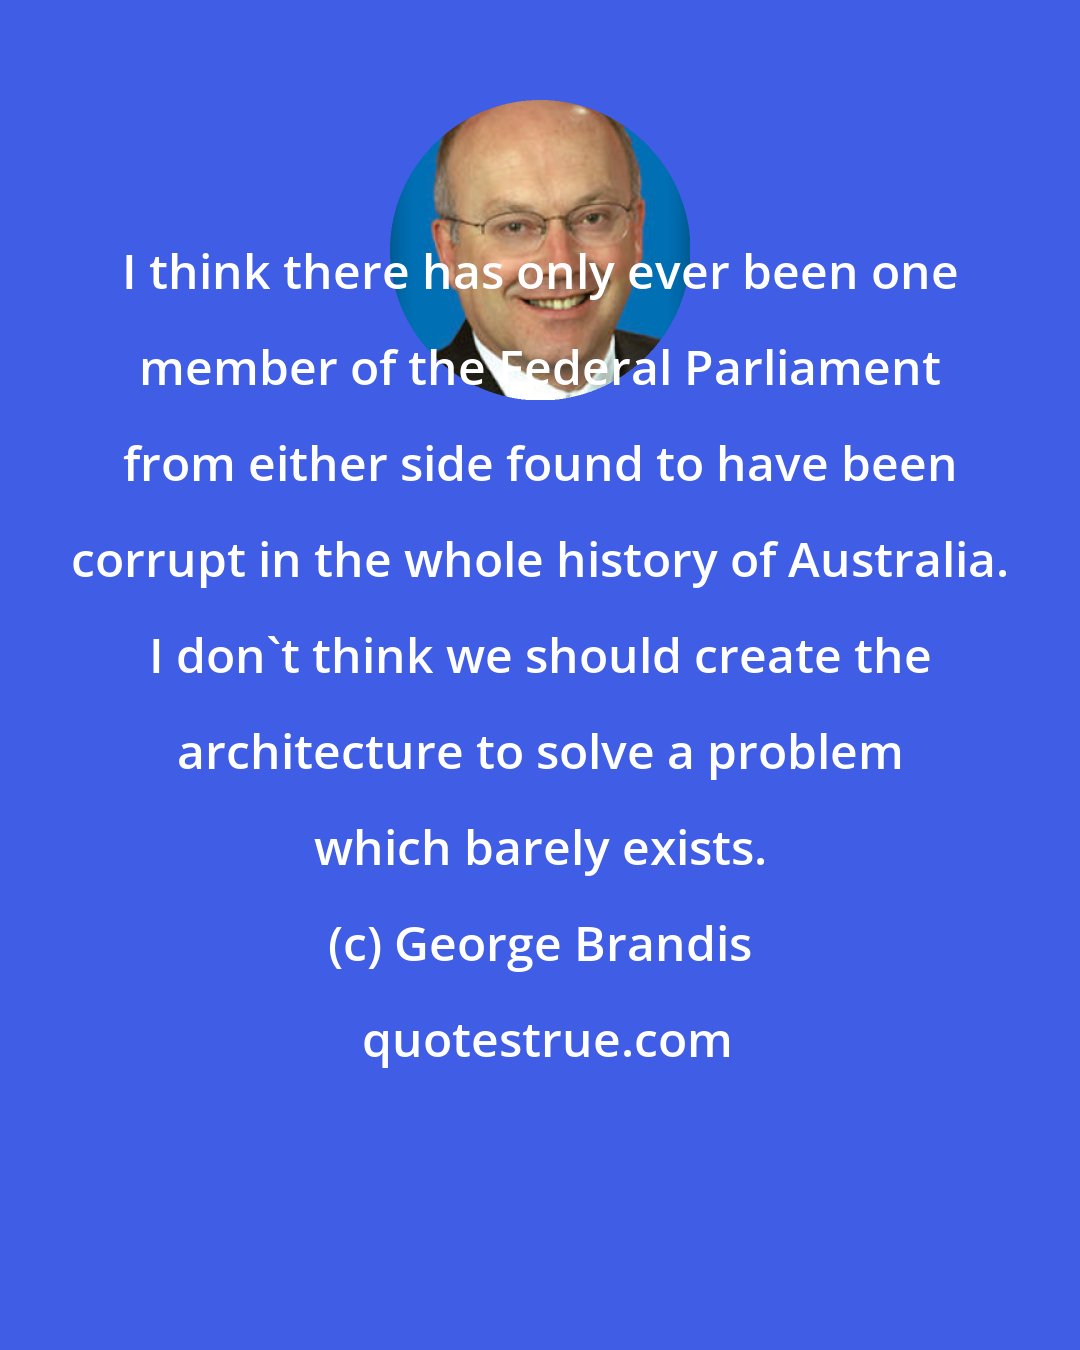 George Brandis: I think there has only ever been one member of the Federal Parliament from either side found to have been corrupt in the whole history of Australia. I don't think we should create the architecture to solve a problem which barely exists.